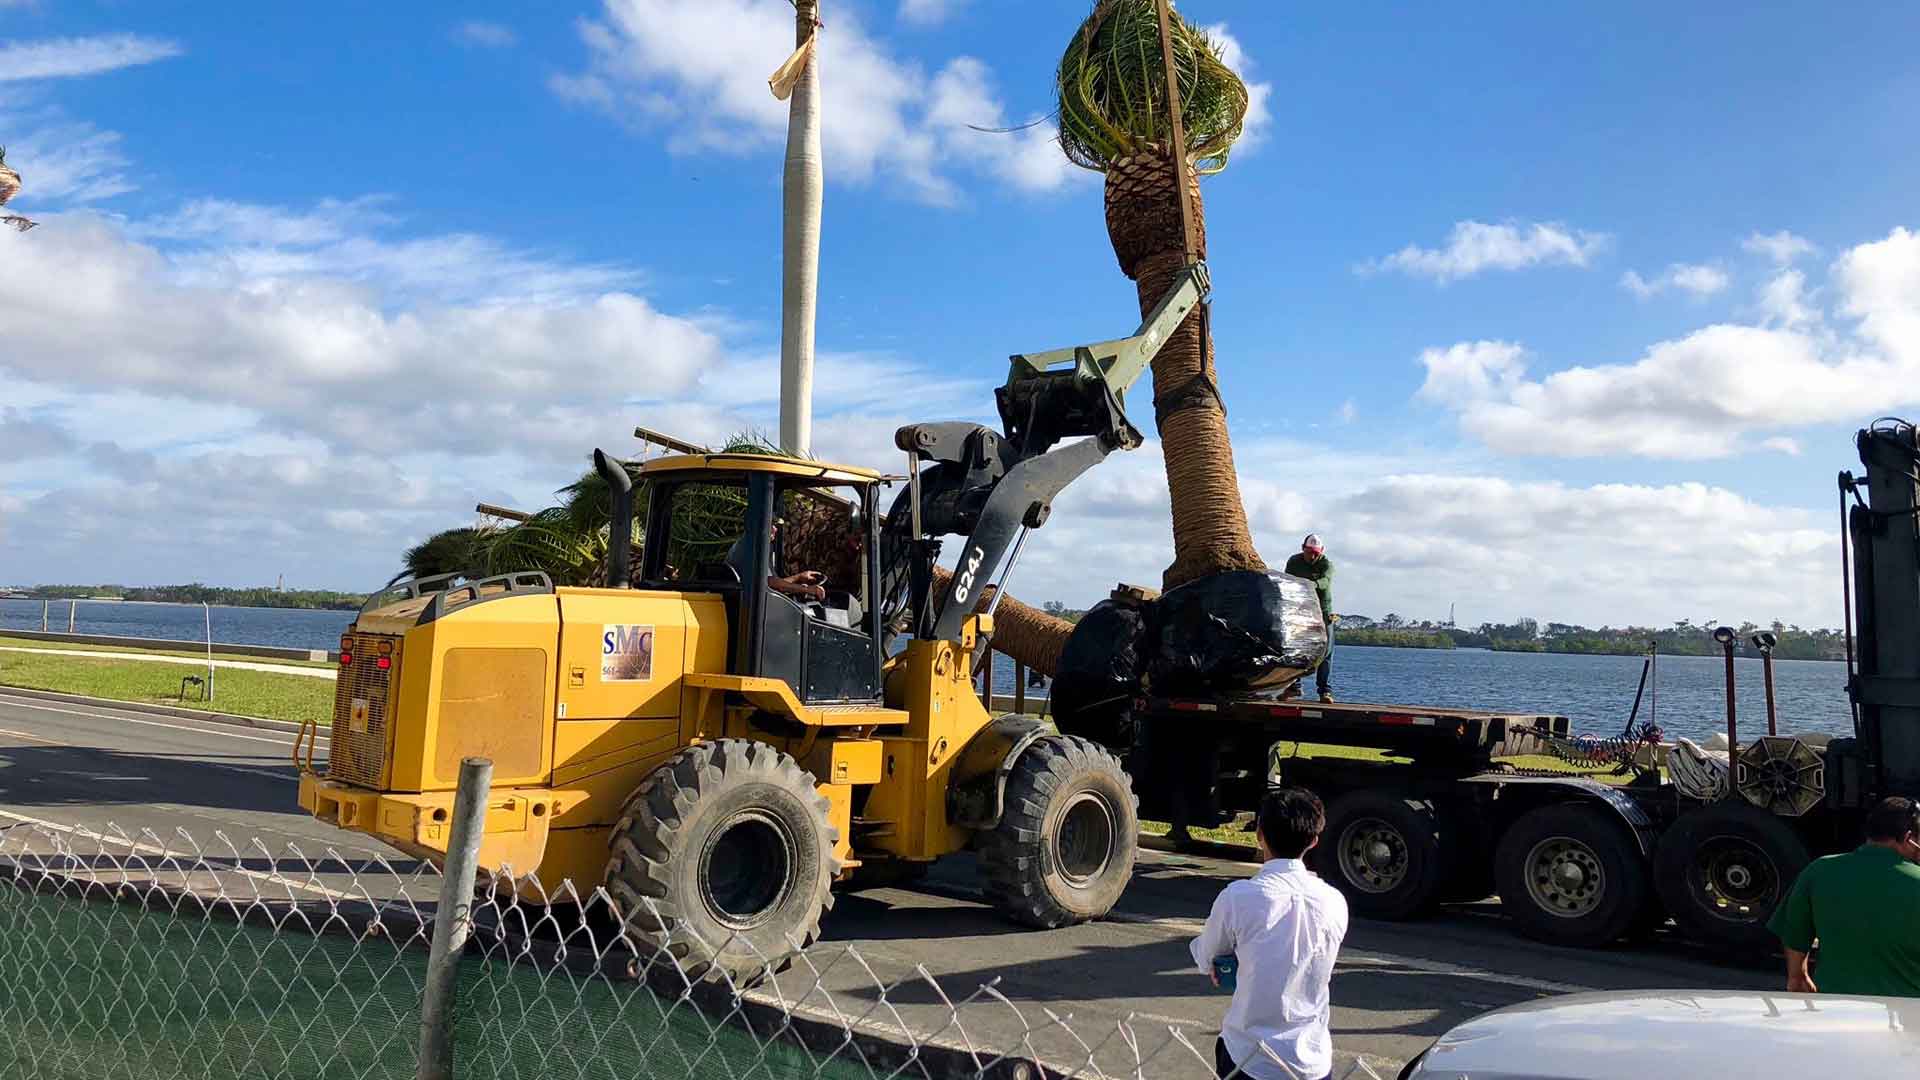 Very large palm tree being planted at a commercial property in Palm Beach, FL.